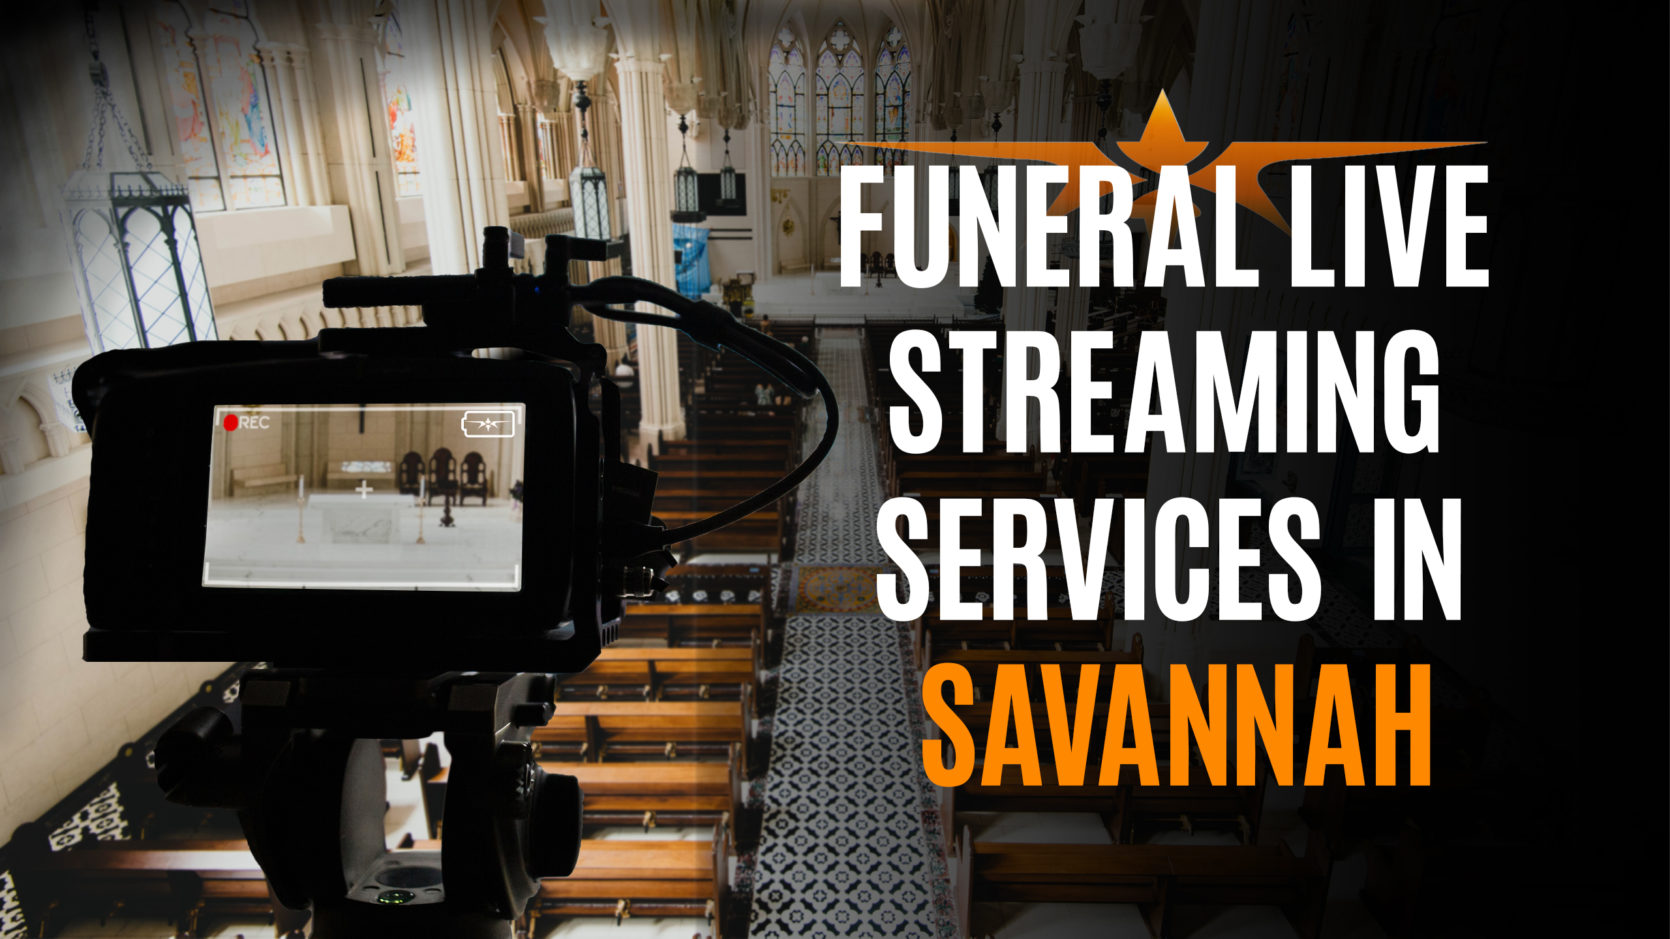 Funeral Live Streaming Services in Savannah